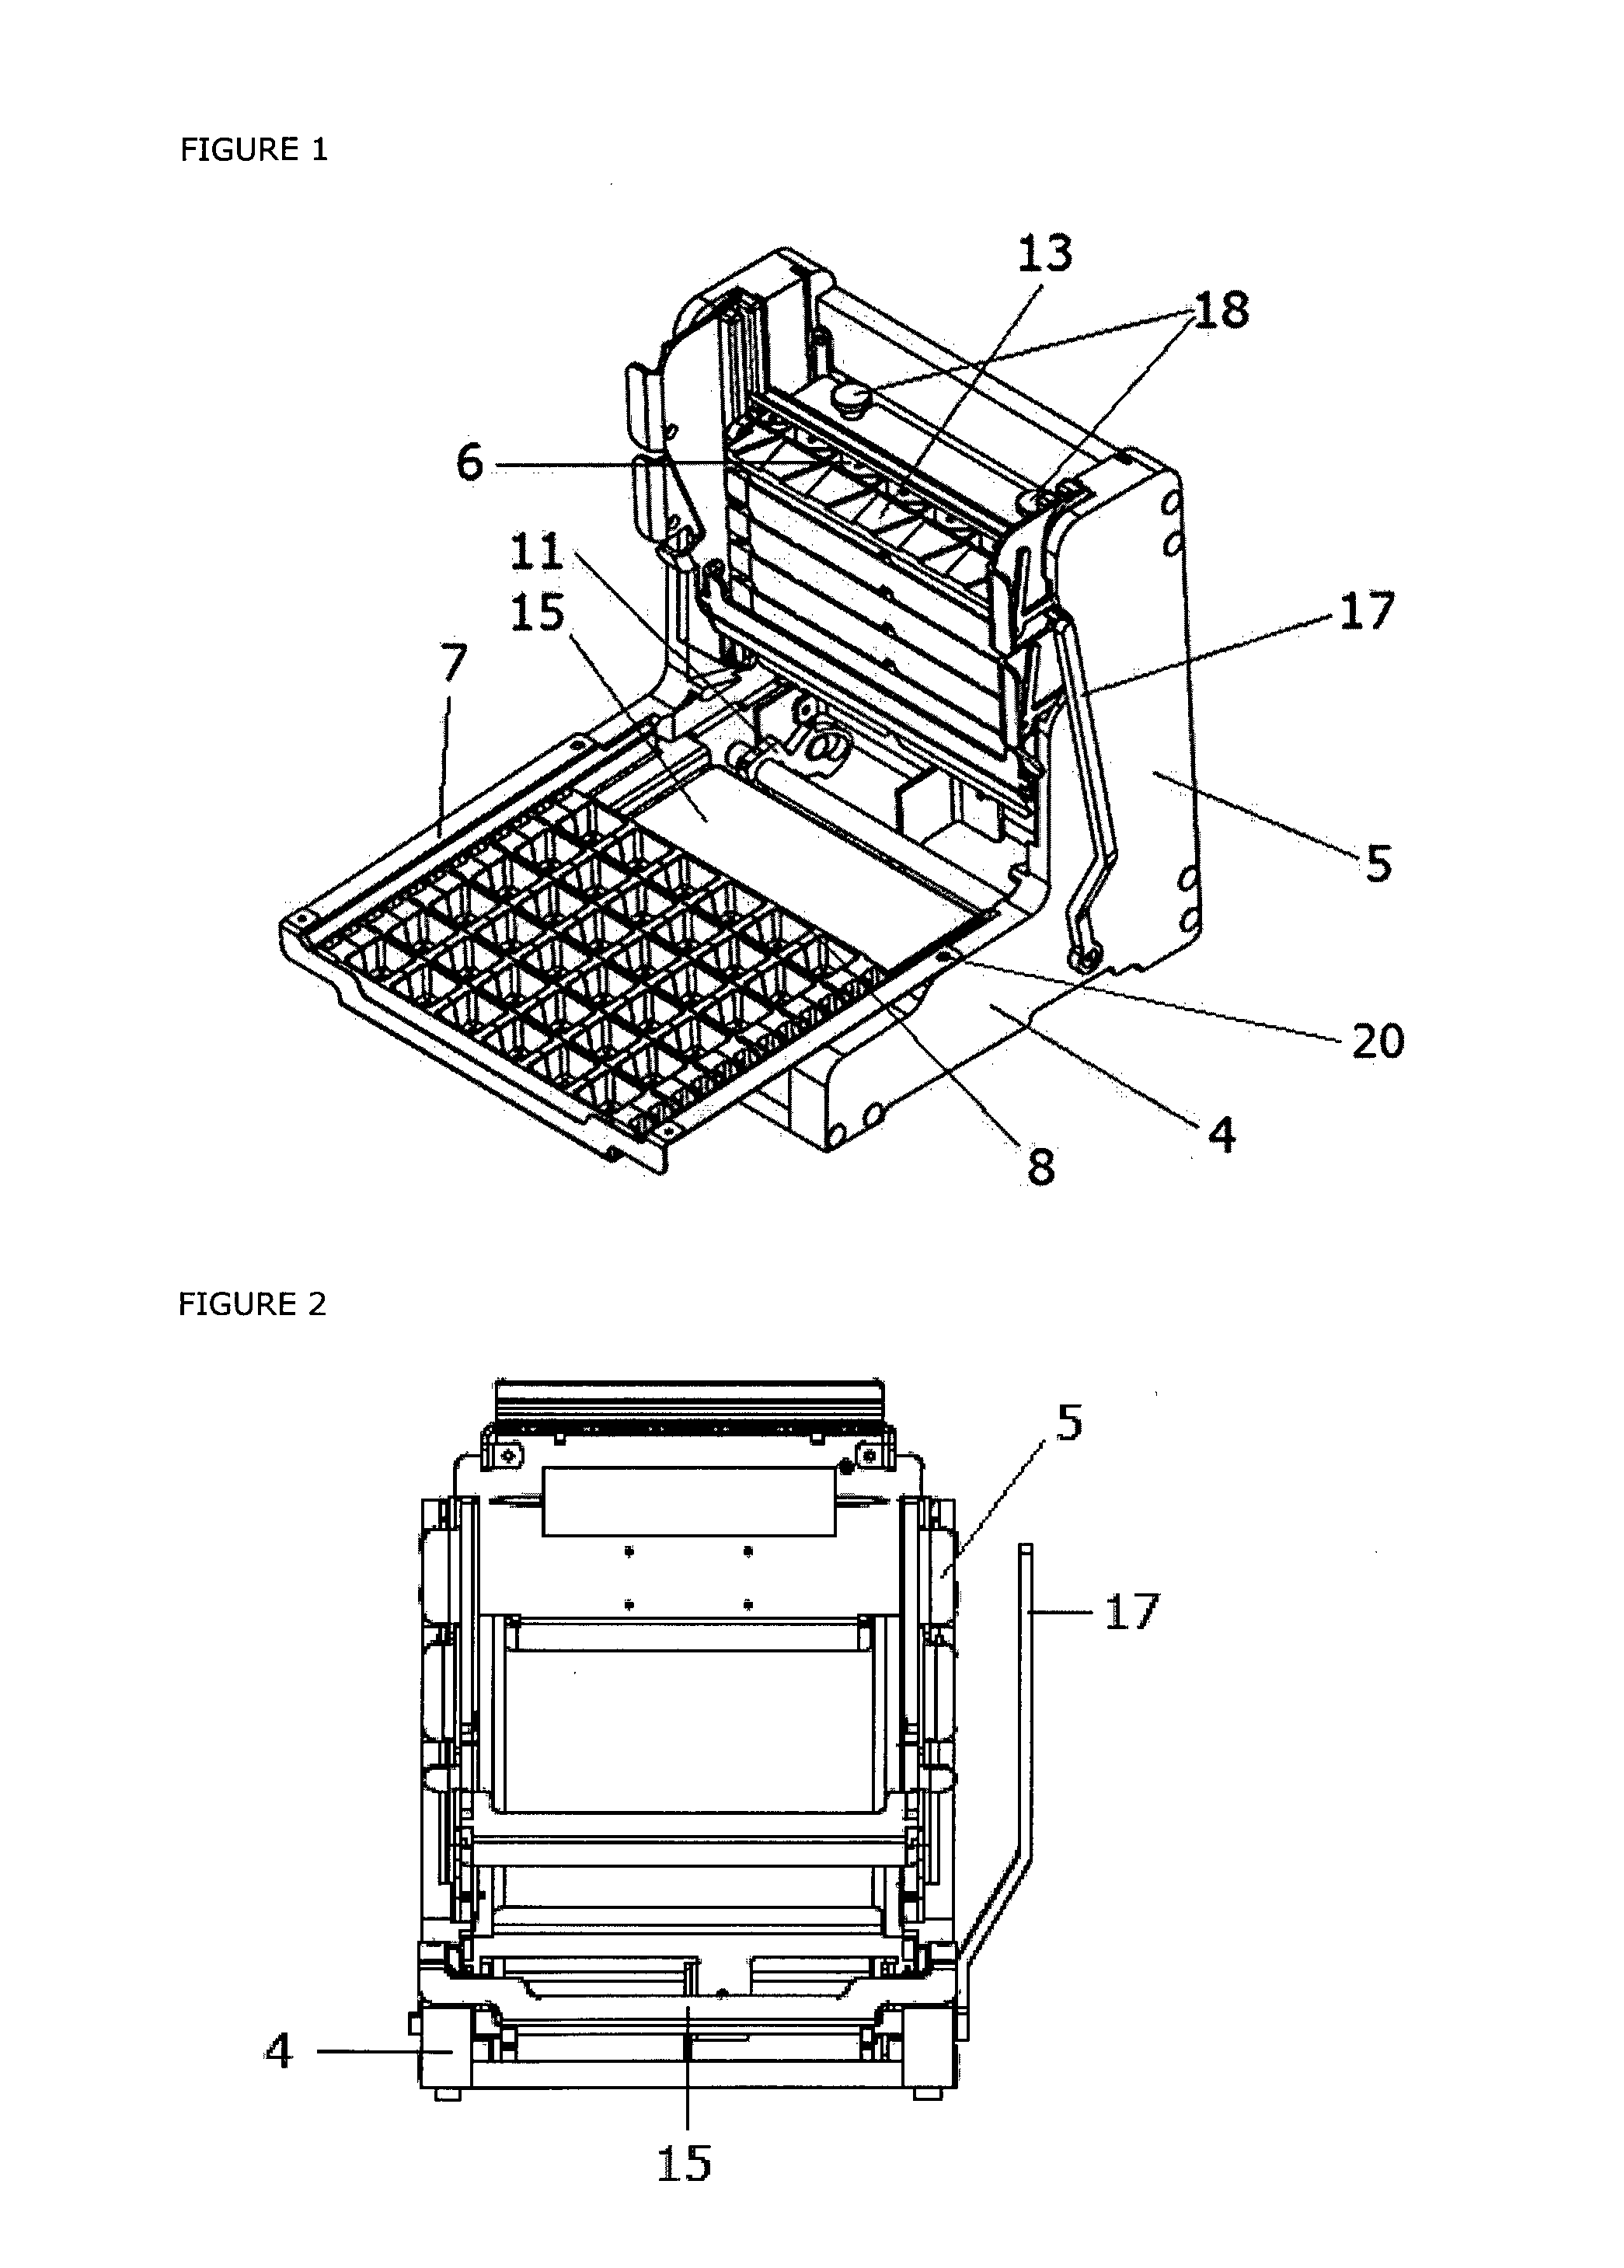 Device and method for composing satays